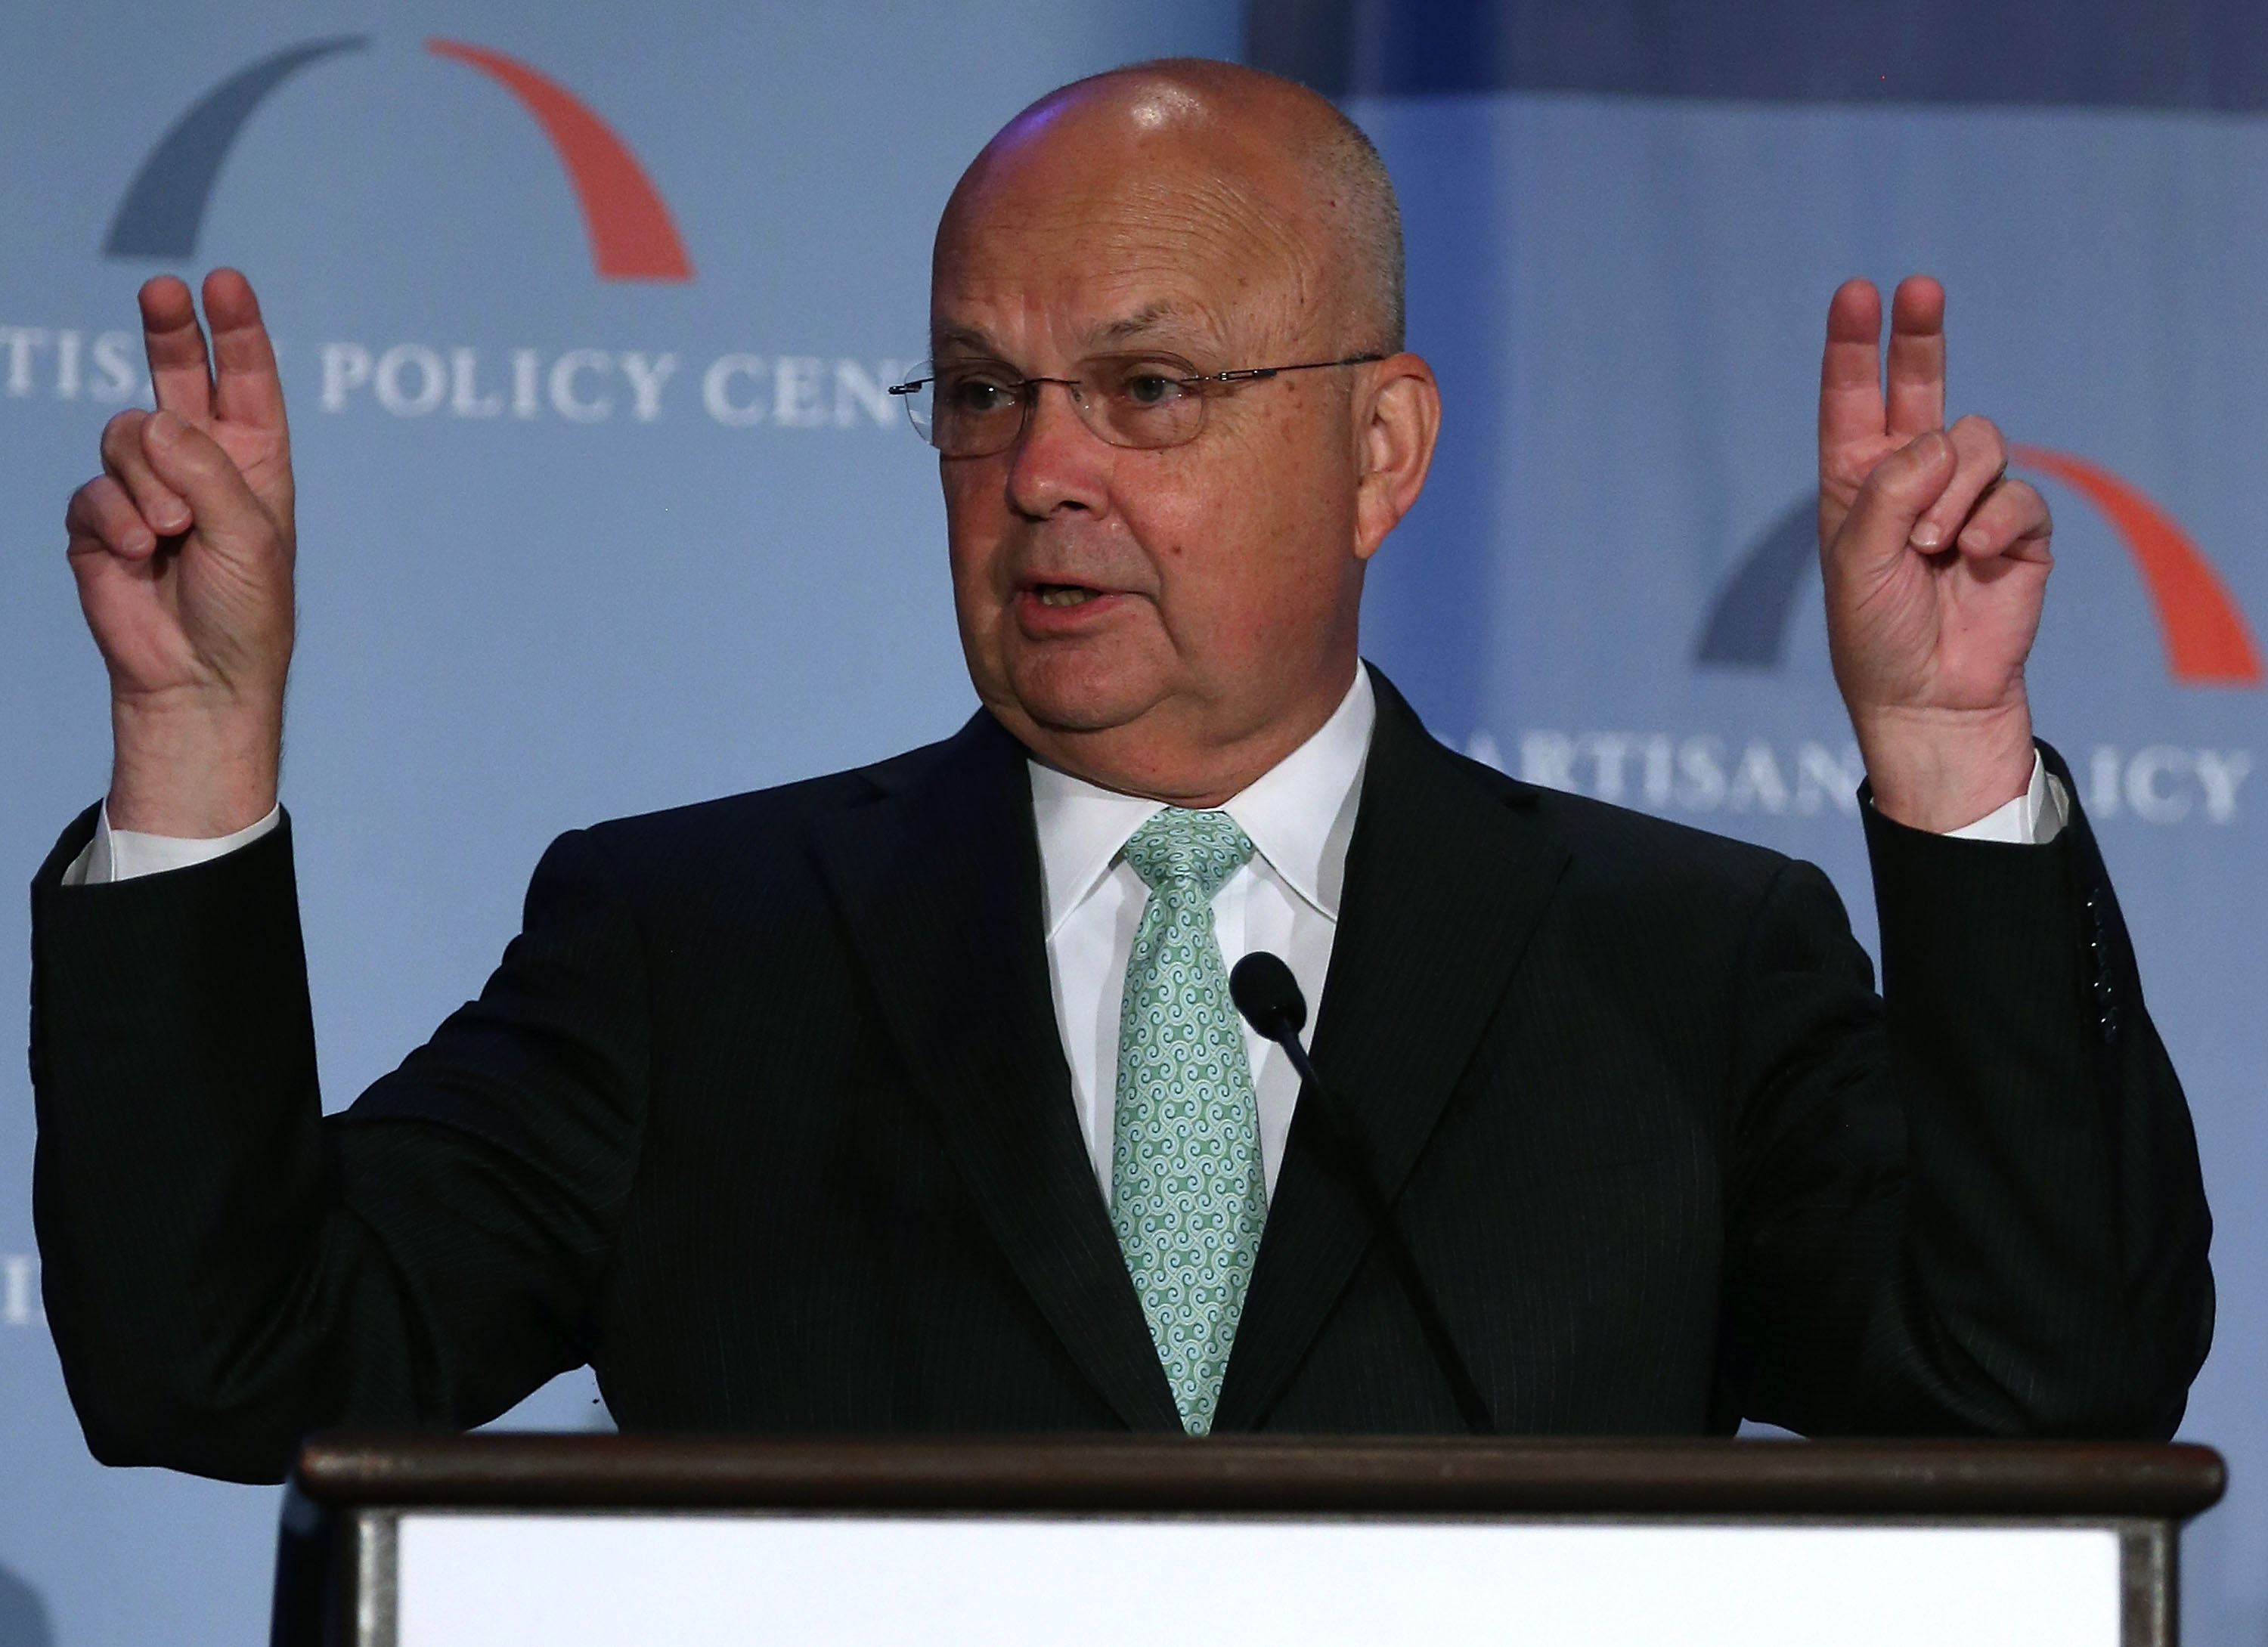 Former Director Of The NSA And CIA Michael Hayden Speaks At Security Conference